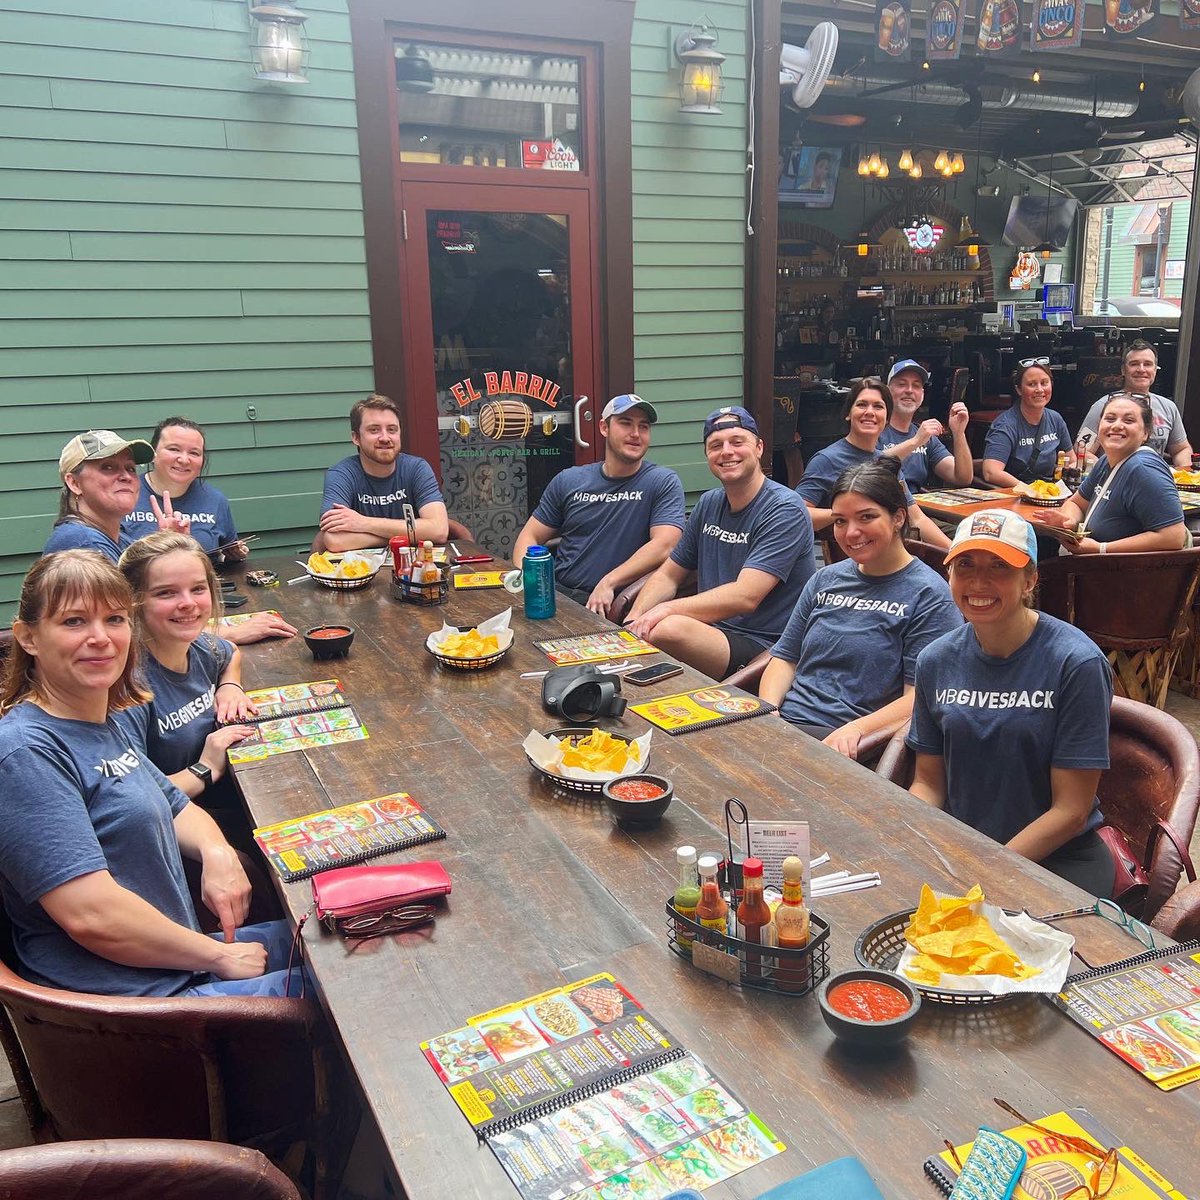 Our Cincinnati office volunteered for the Cincy #MayorsChallenge and laid mulch in Eden Park around Mirror Lake. A hard days work isn’t complete without a team lunch afterwards! 🌮 #MuchBetterAtMB